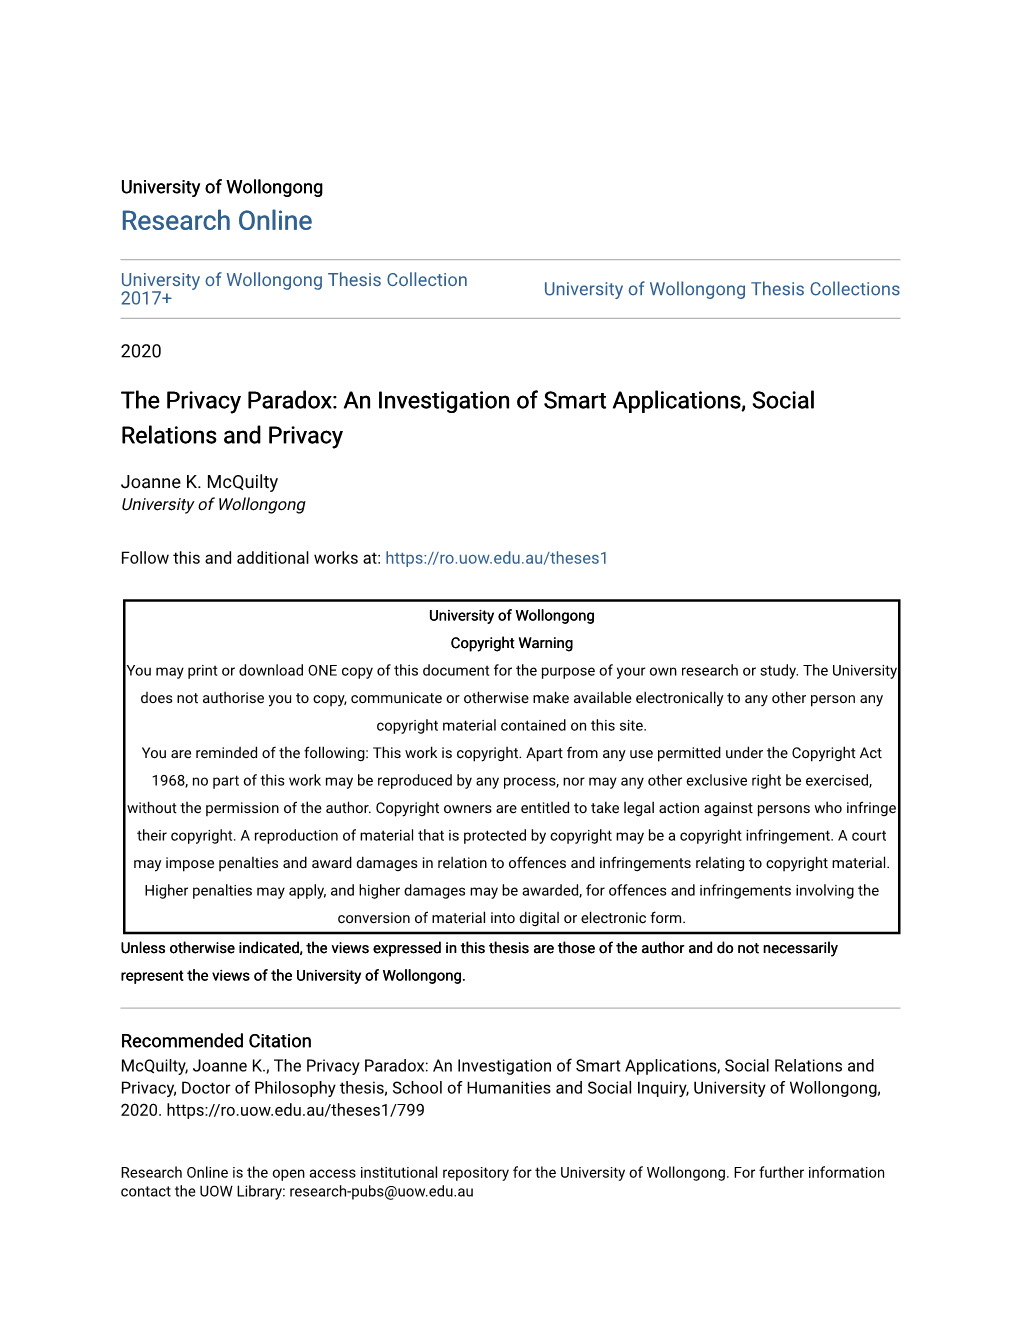 An Investigation of Smart Applications, Social Relations and Privacy